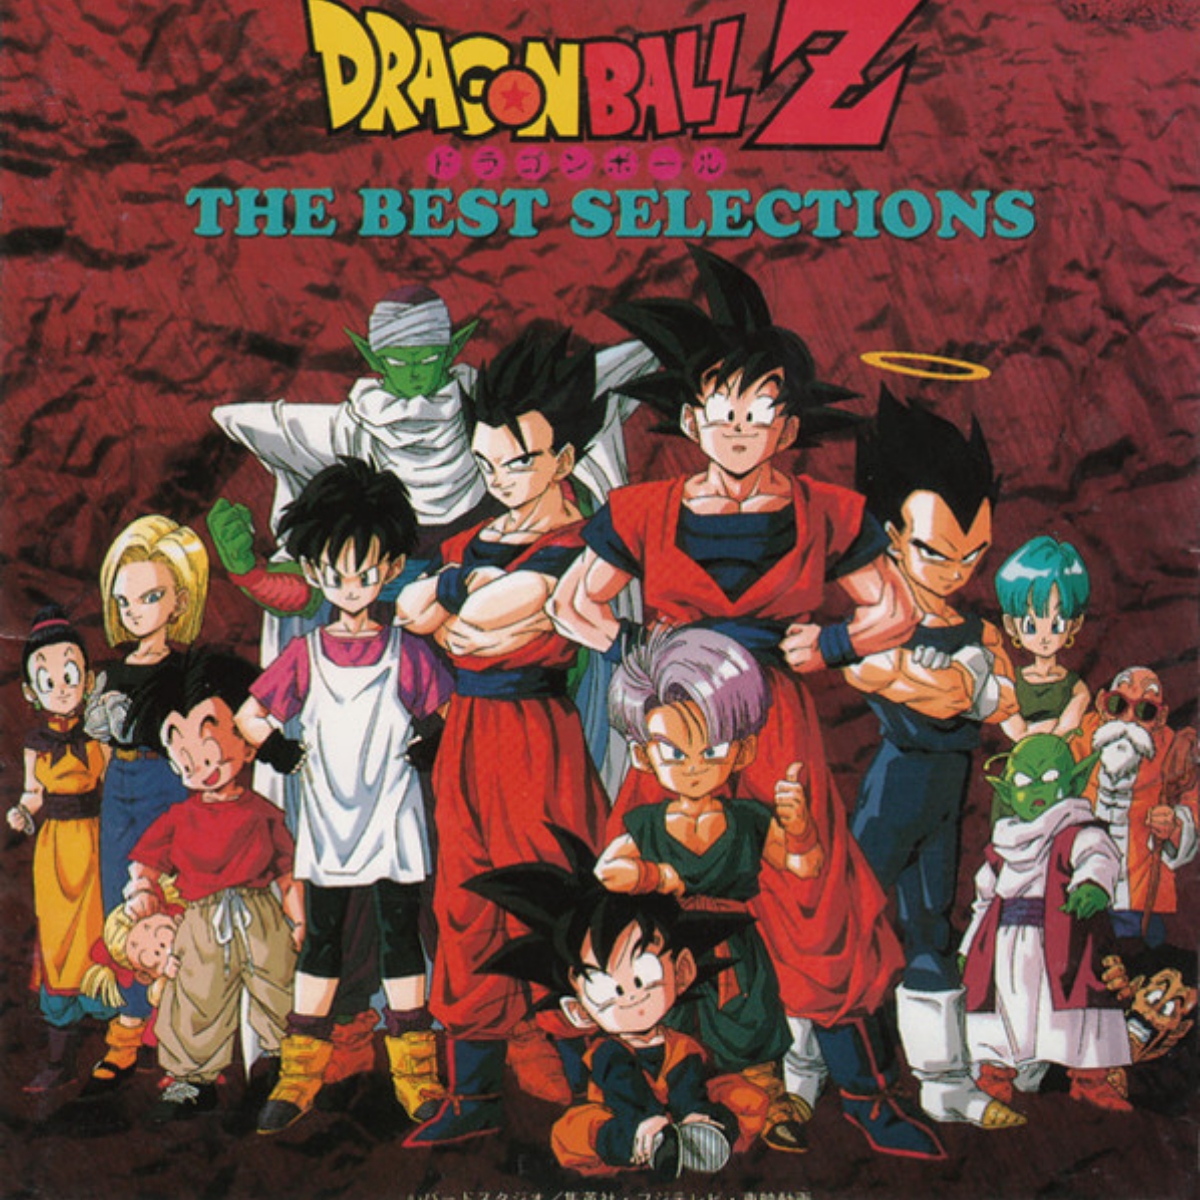 Dragon Ball Z: The Best Selections - Osanime